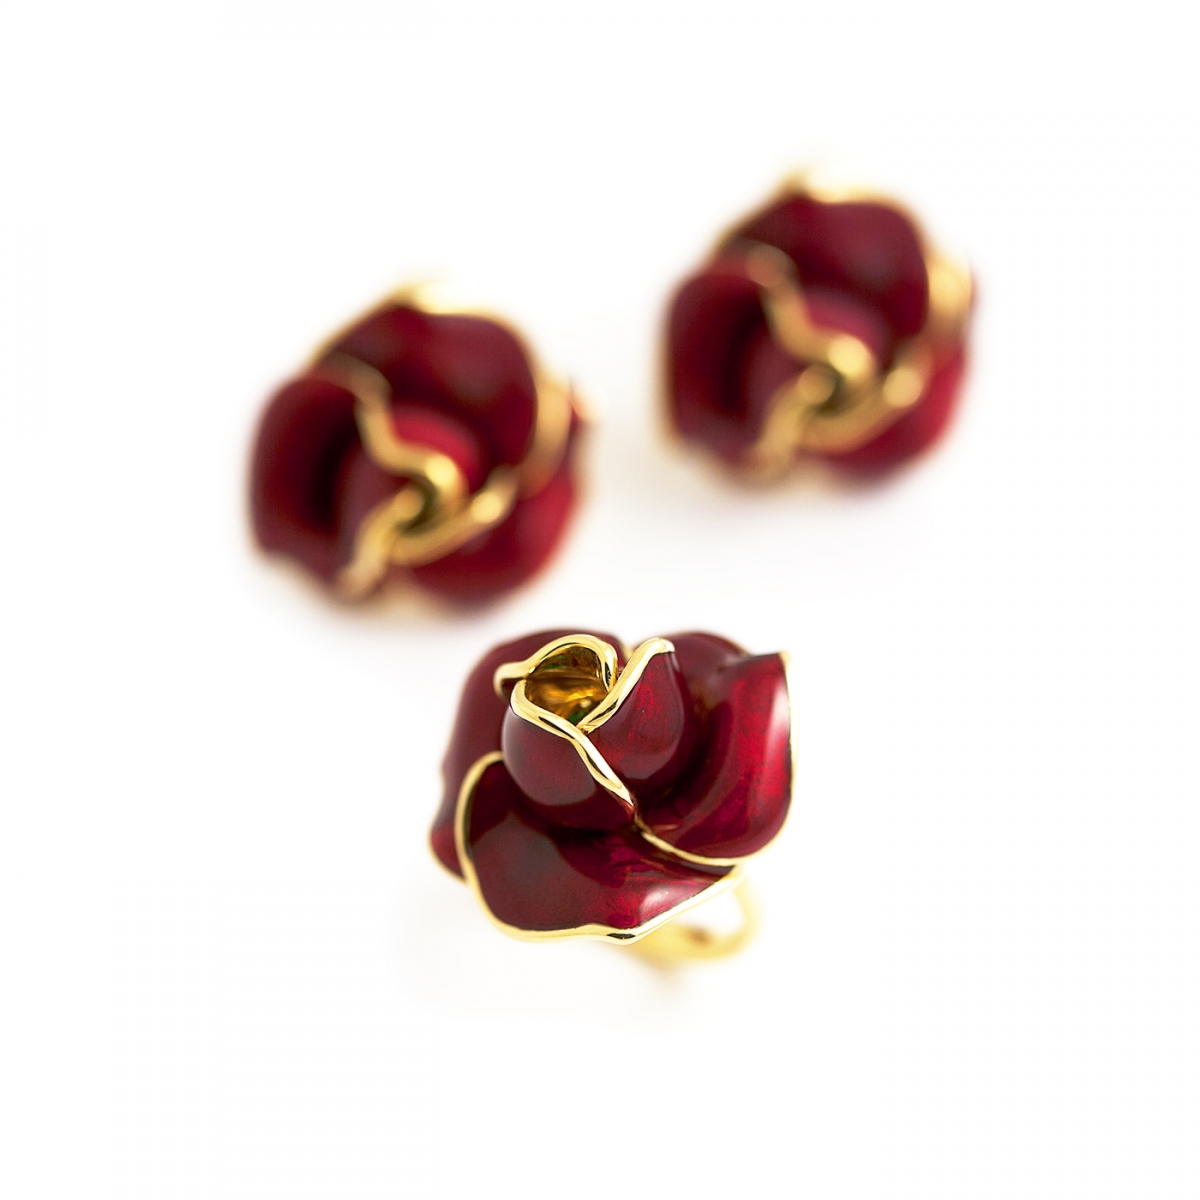 Rosa ring and earrings